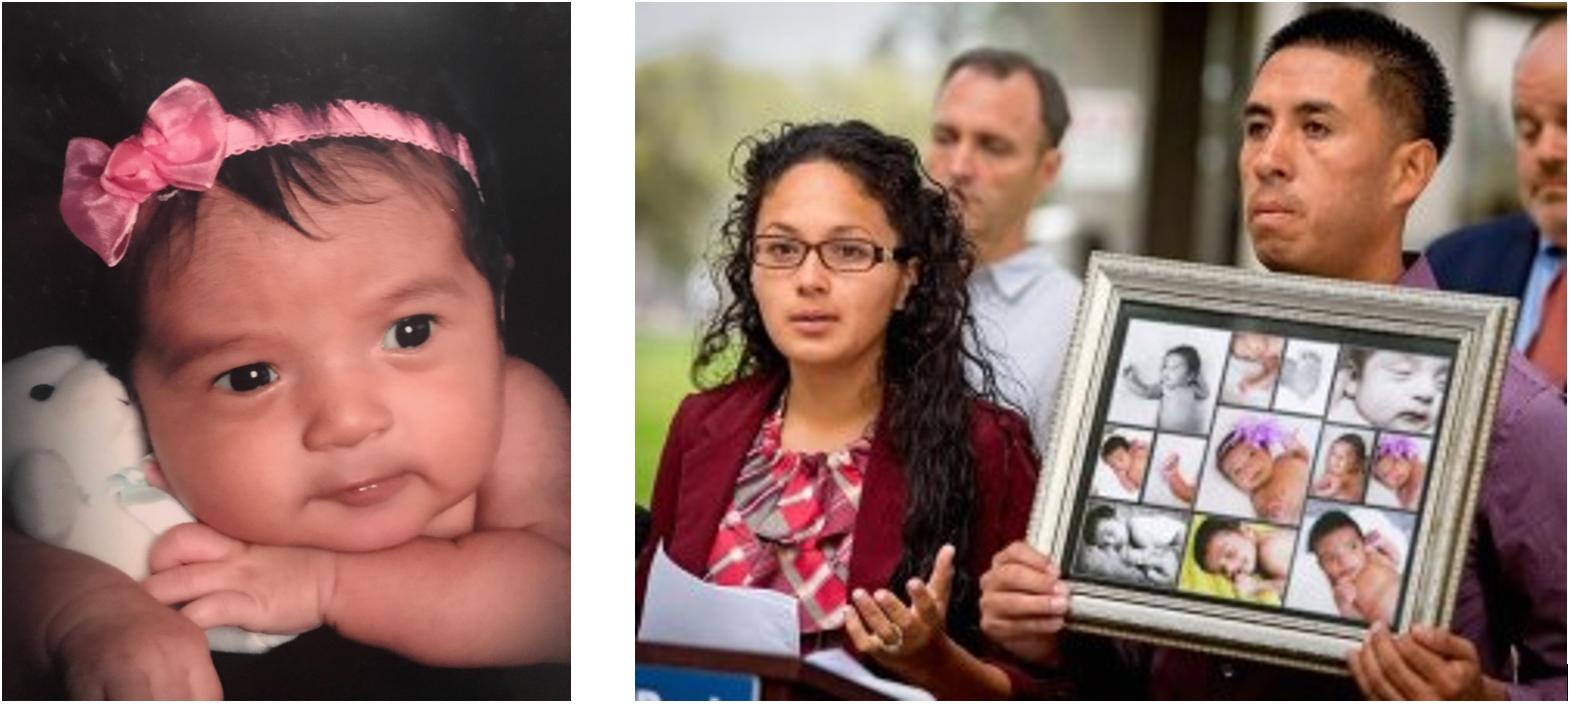 Infant Mia with a bow in her hair; Alejandra and Miguel holding a frame of Mia photos.